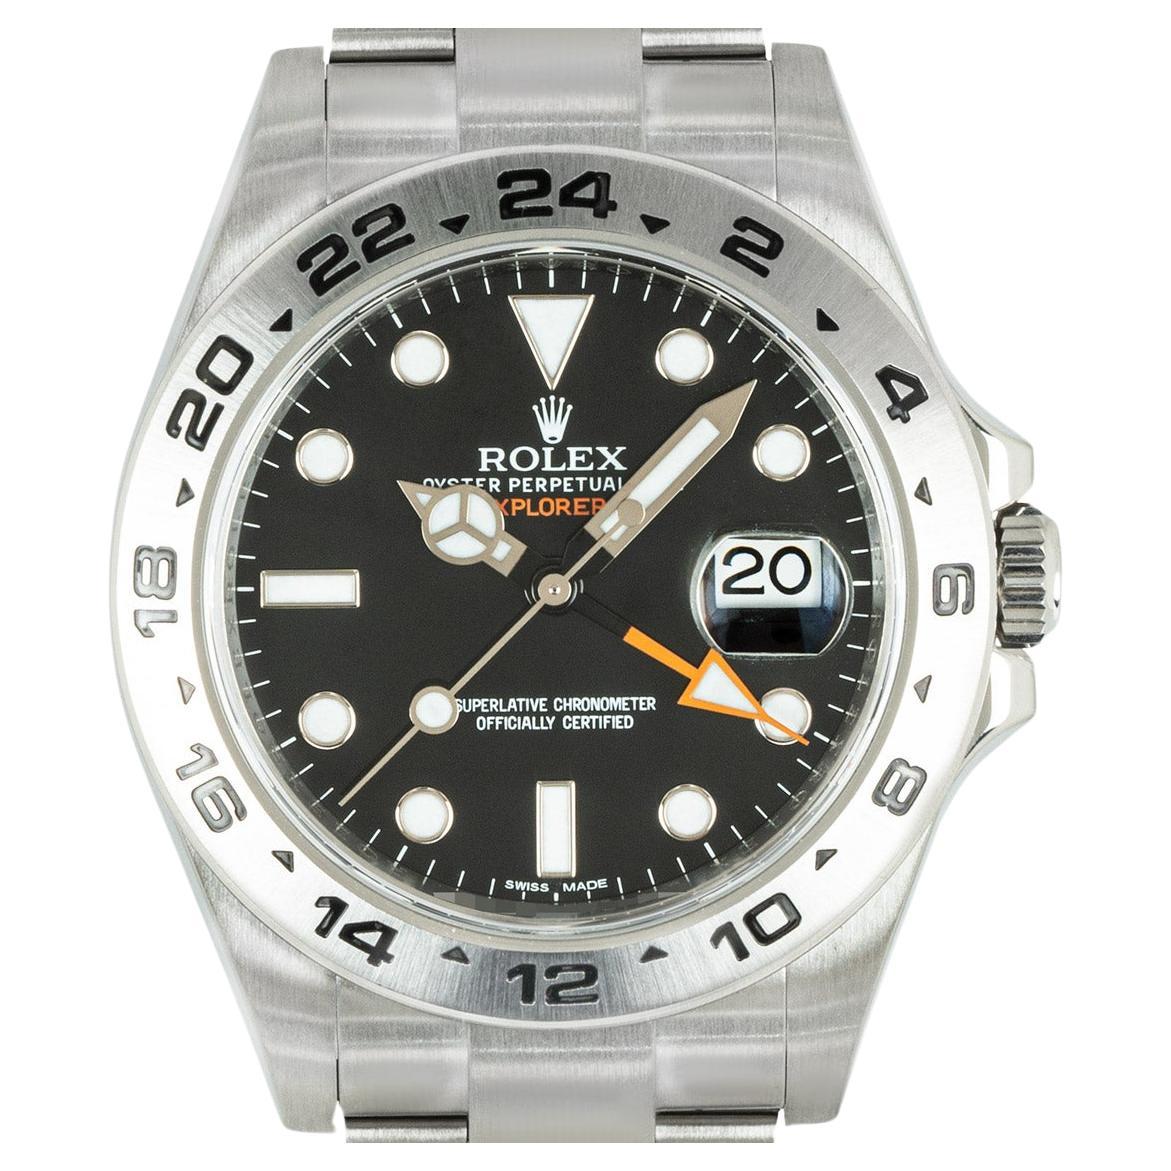 A men's Explorer II wristwatch in Oystersteel by Rolex. Features a black dial with applied hour markers, a date aperture, an orange 24-hour hand and a fixed stainless steel bezel featuring an engraved 24-hour display.

Fitted with a sapphire glass